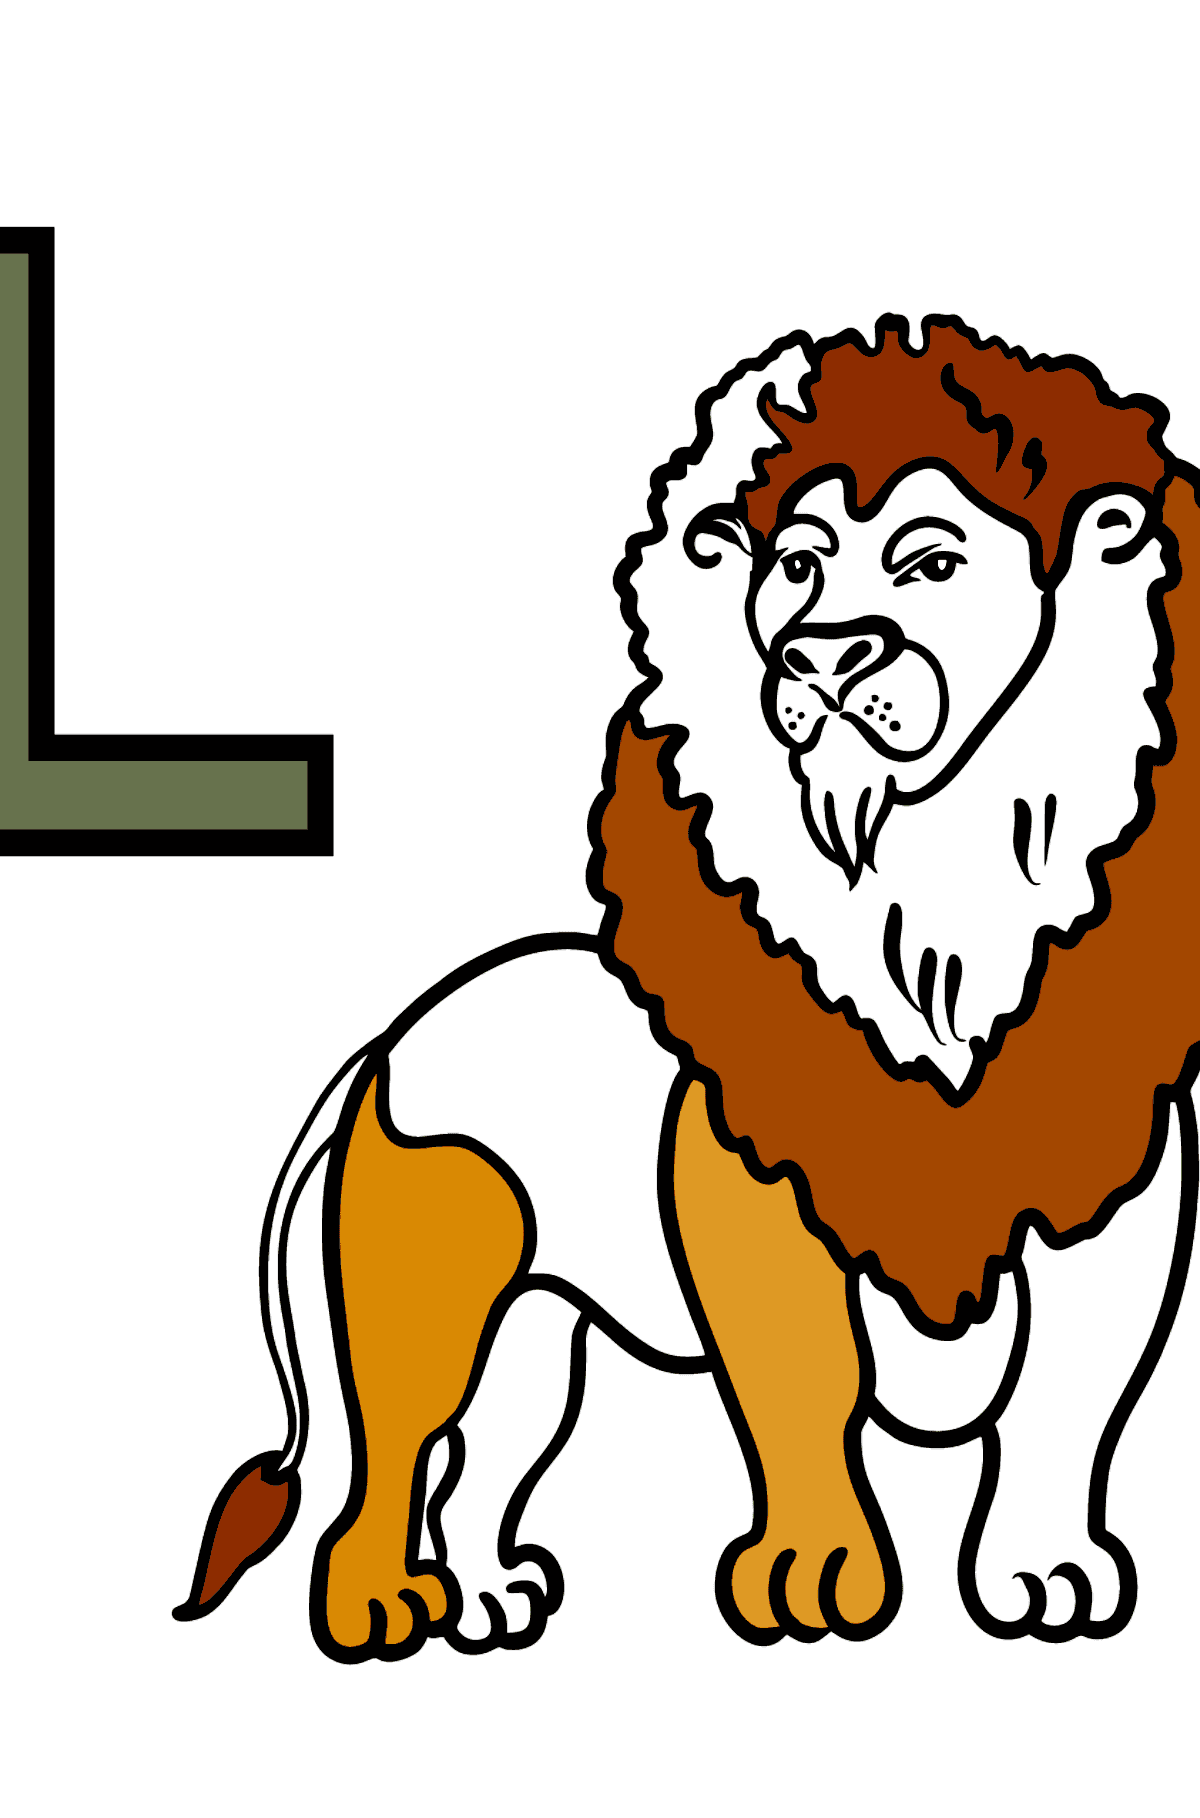 Spanish Letter L coloring pages - LEON - Coloring Pages for Kids